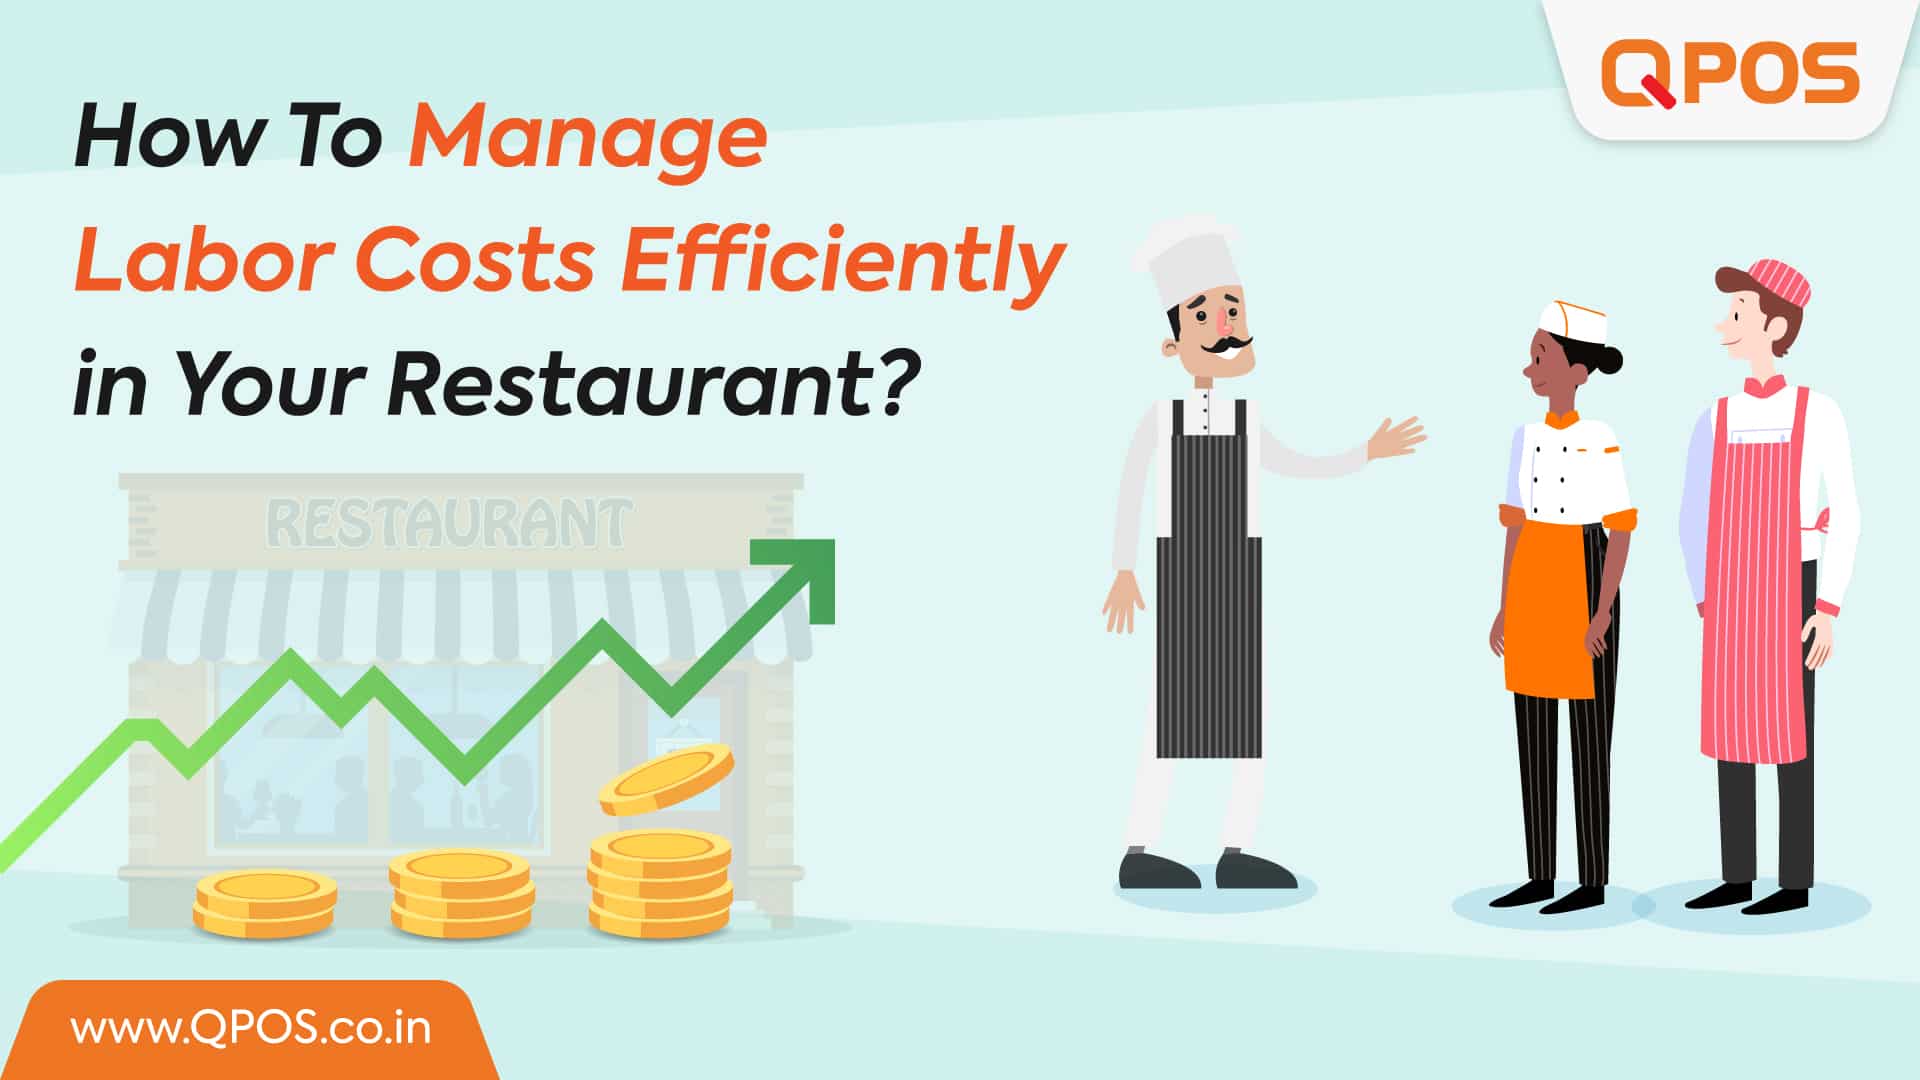 How To Manage Labor Costs Efficiently in Your Restaurant